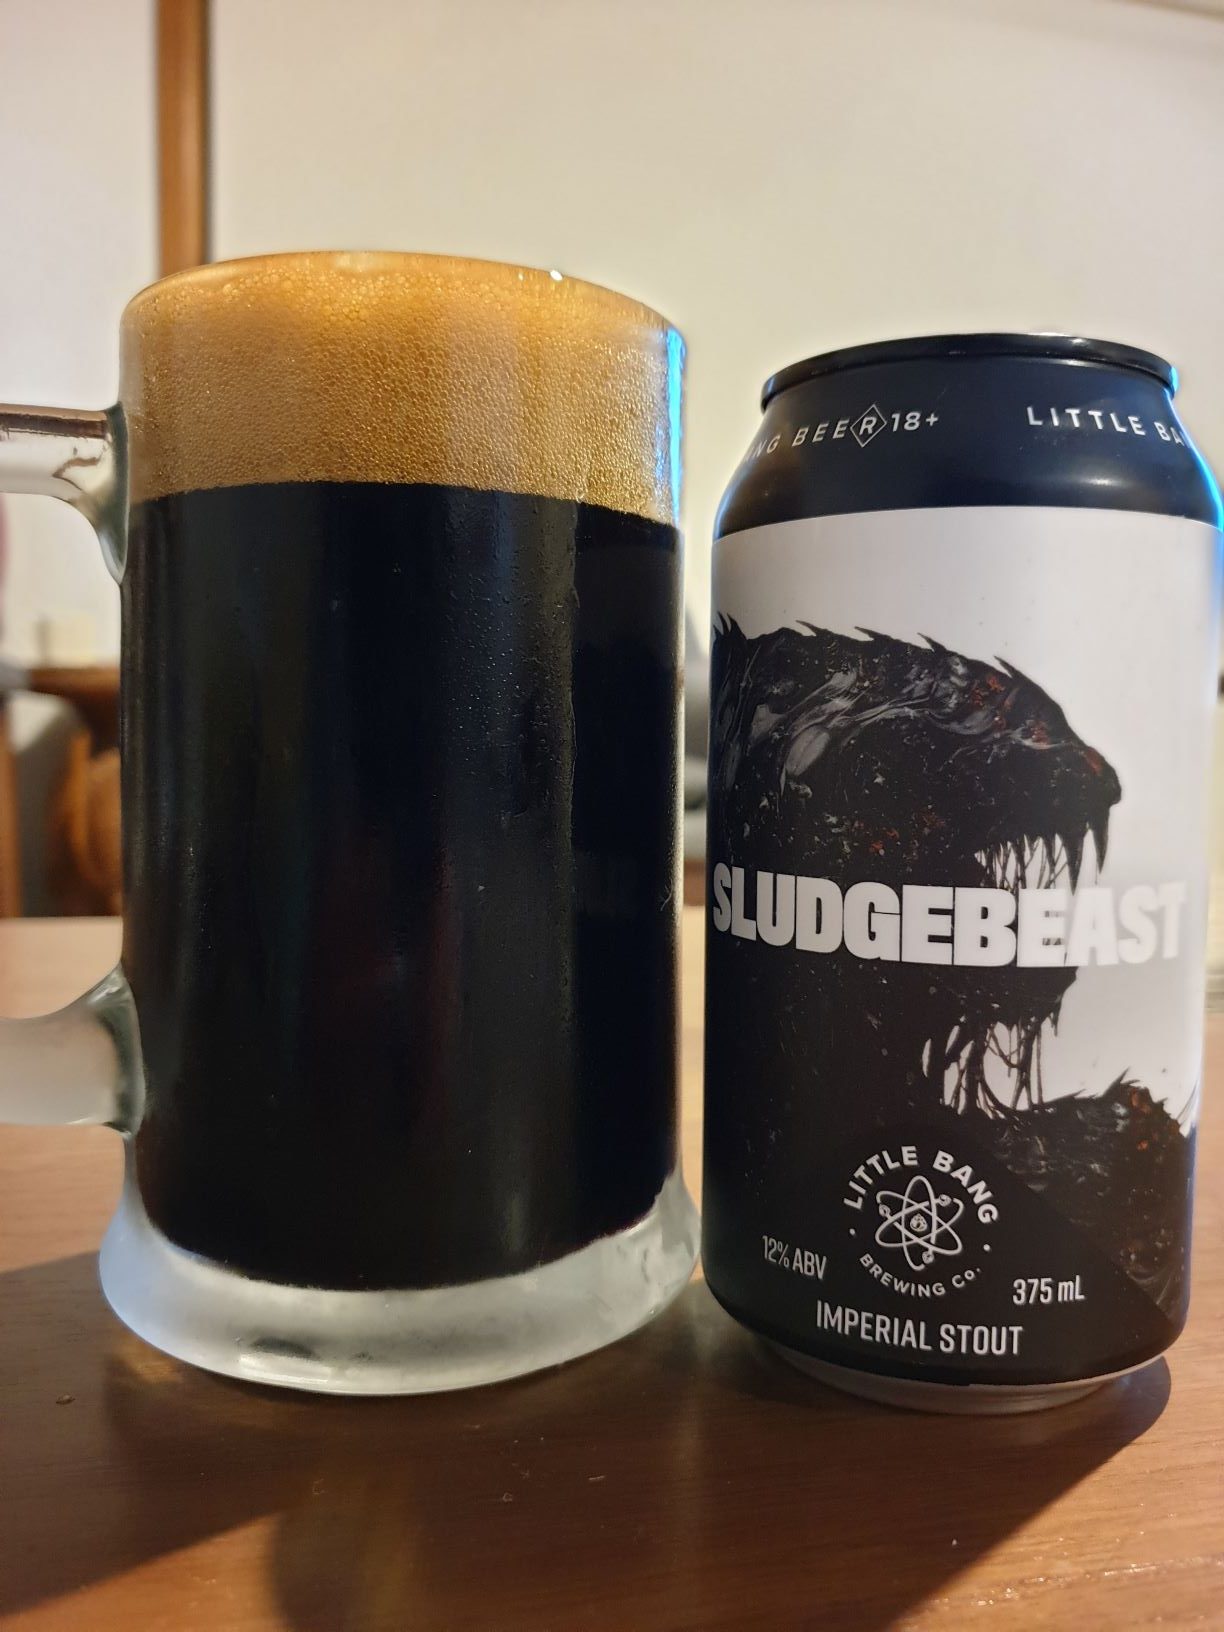 Sludgebeast Imperial Stout by Little Bang Brewing